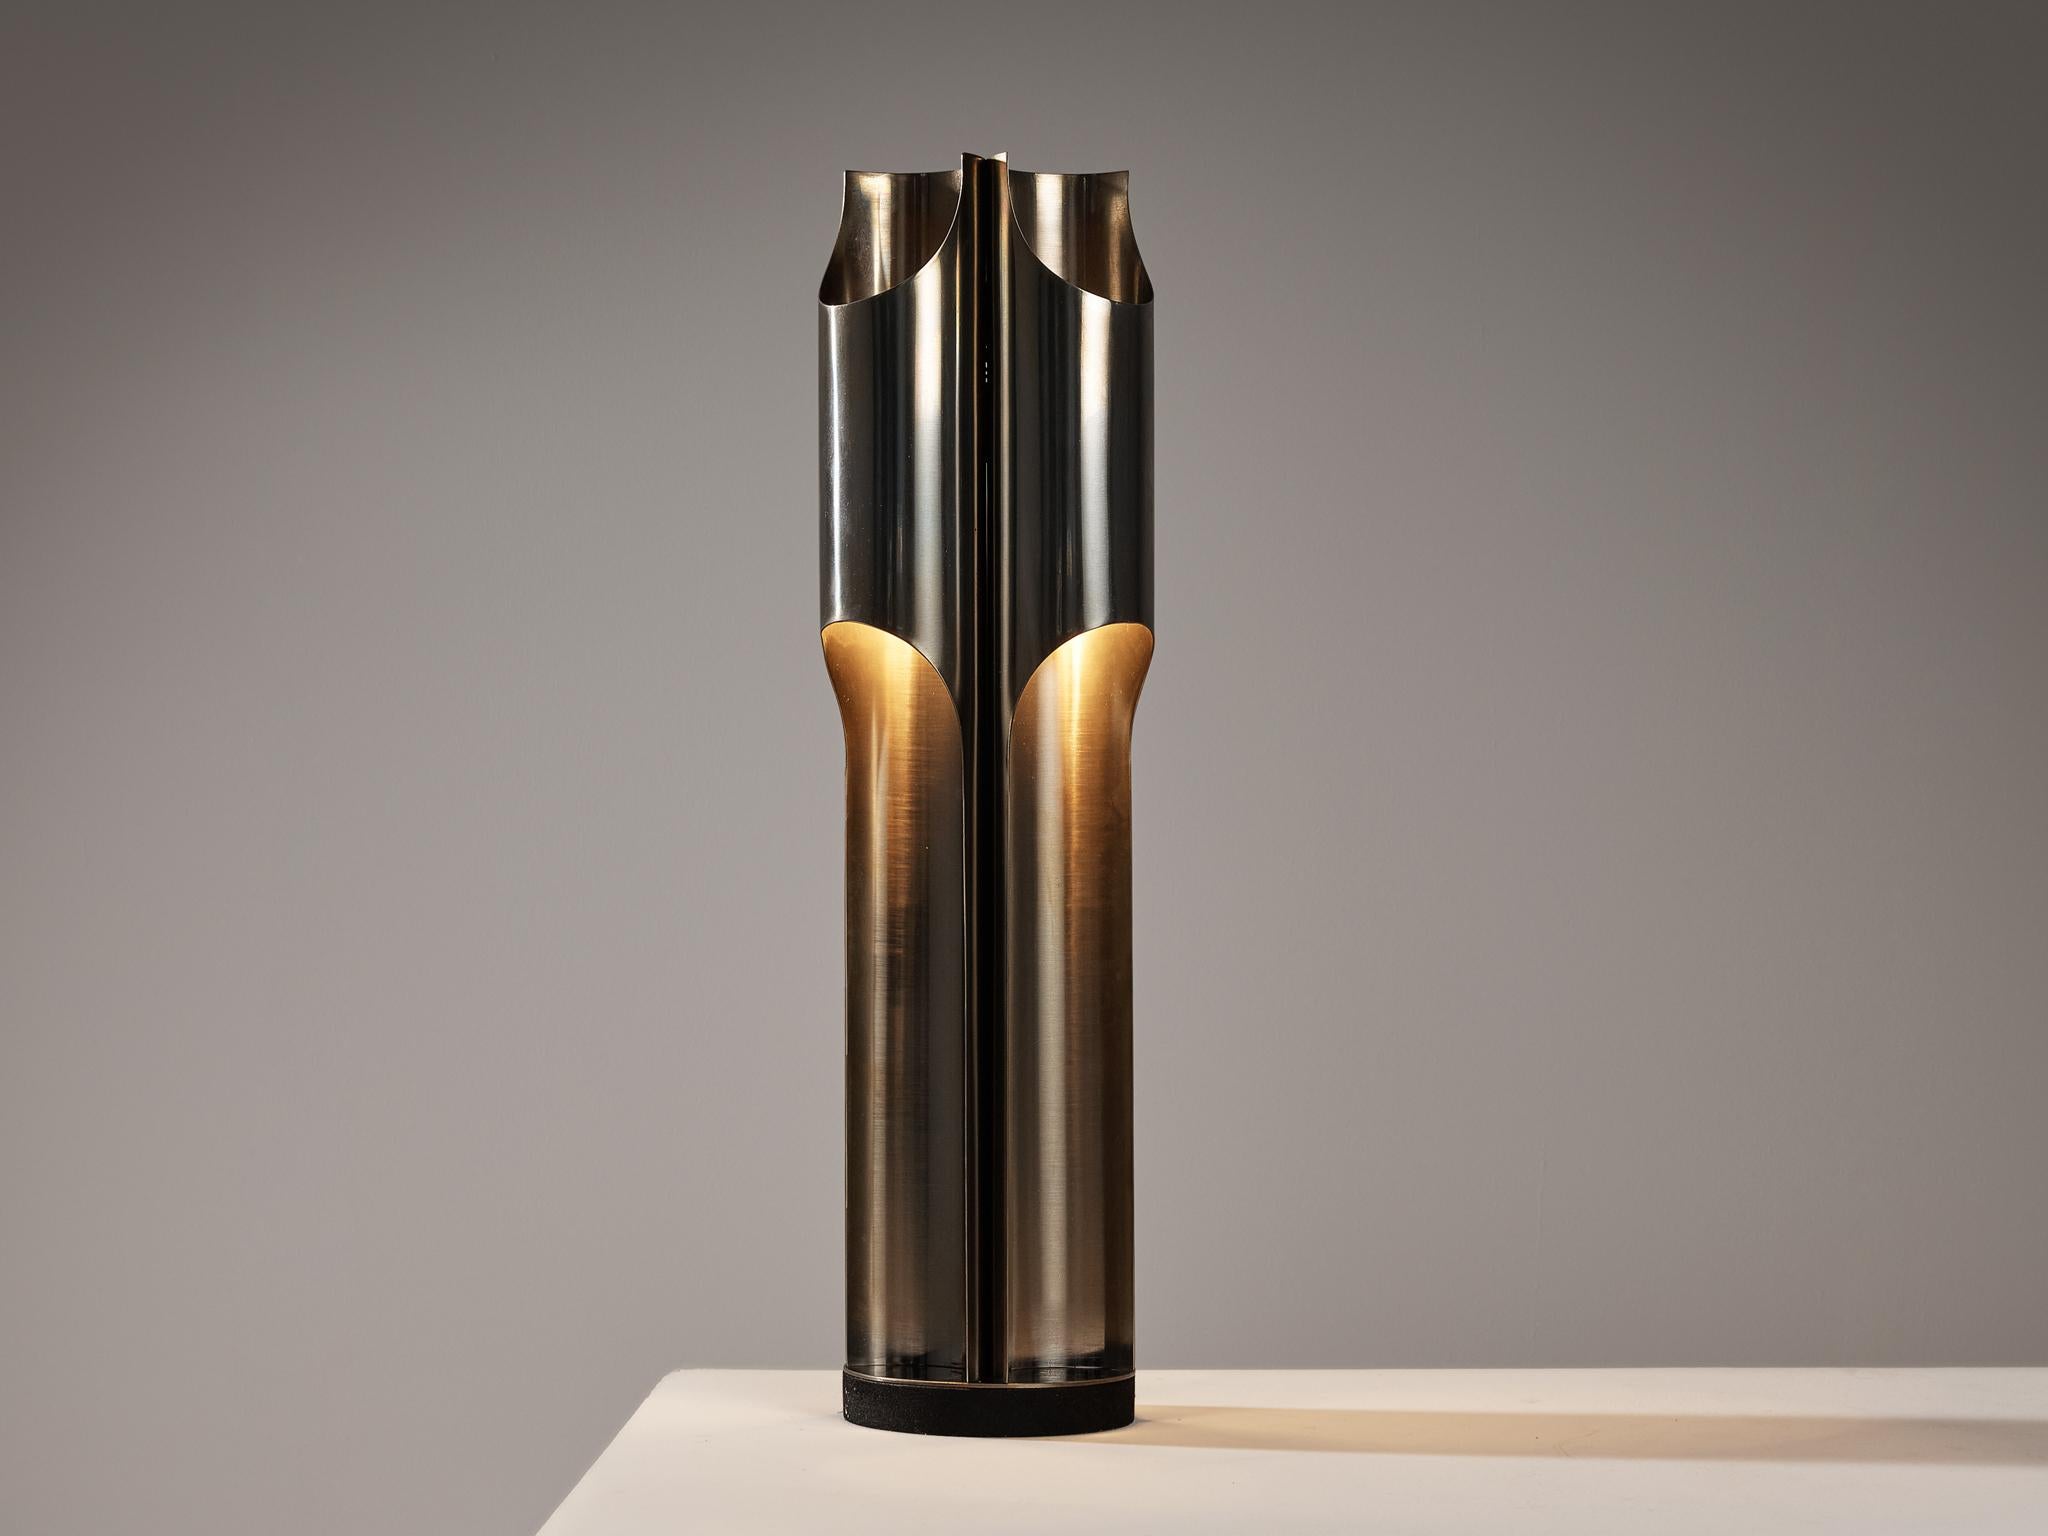 Jacques Charles for Maison Charles, 'Orgue' lamp, part of the 'Inox' collection, stainless steel, France, circa 1970

This sculptural lamp is mainly carried out through a repetition of cylindrical shapes executed in stainless steel, of which the